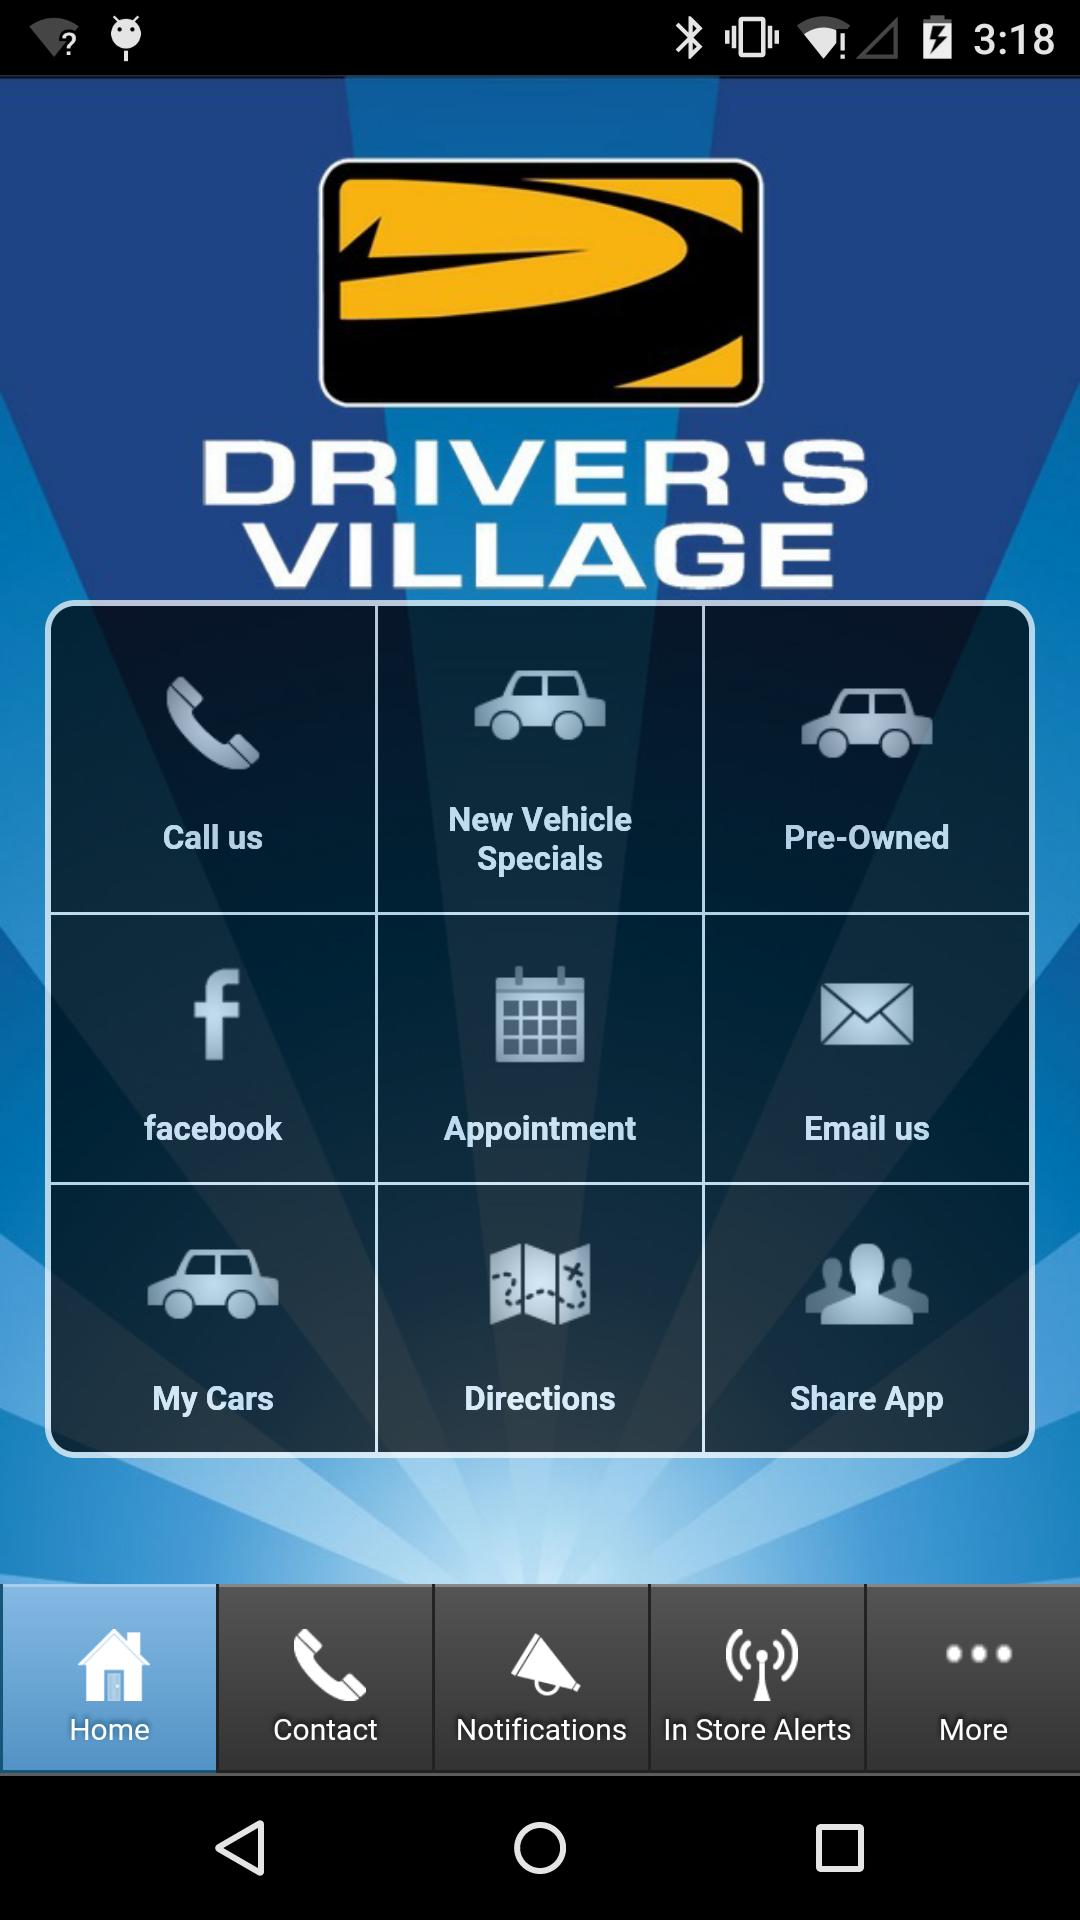 Drives village. Drivers Village. Drivers Village logo. Drivers Village Ташкент. Android Driver.